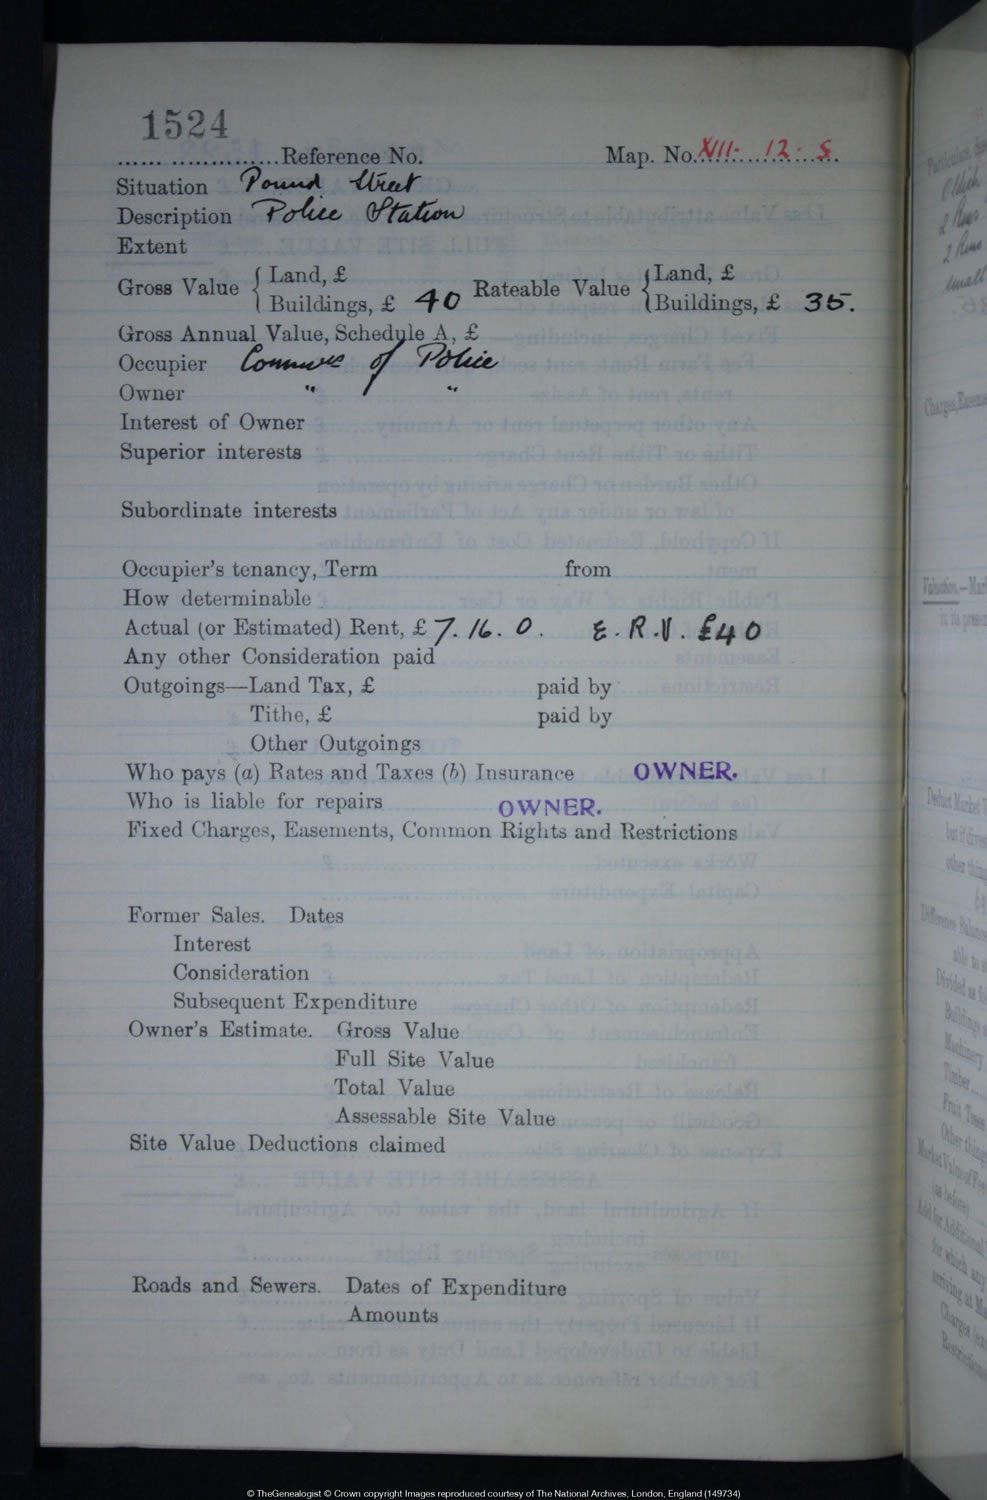 IR58 Field Book for the Pound Street Police Station, an "Oldish yellow brick & slate premises 2 Rms 2 cells"